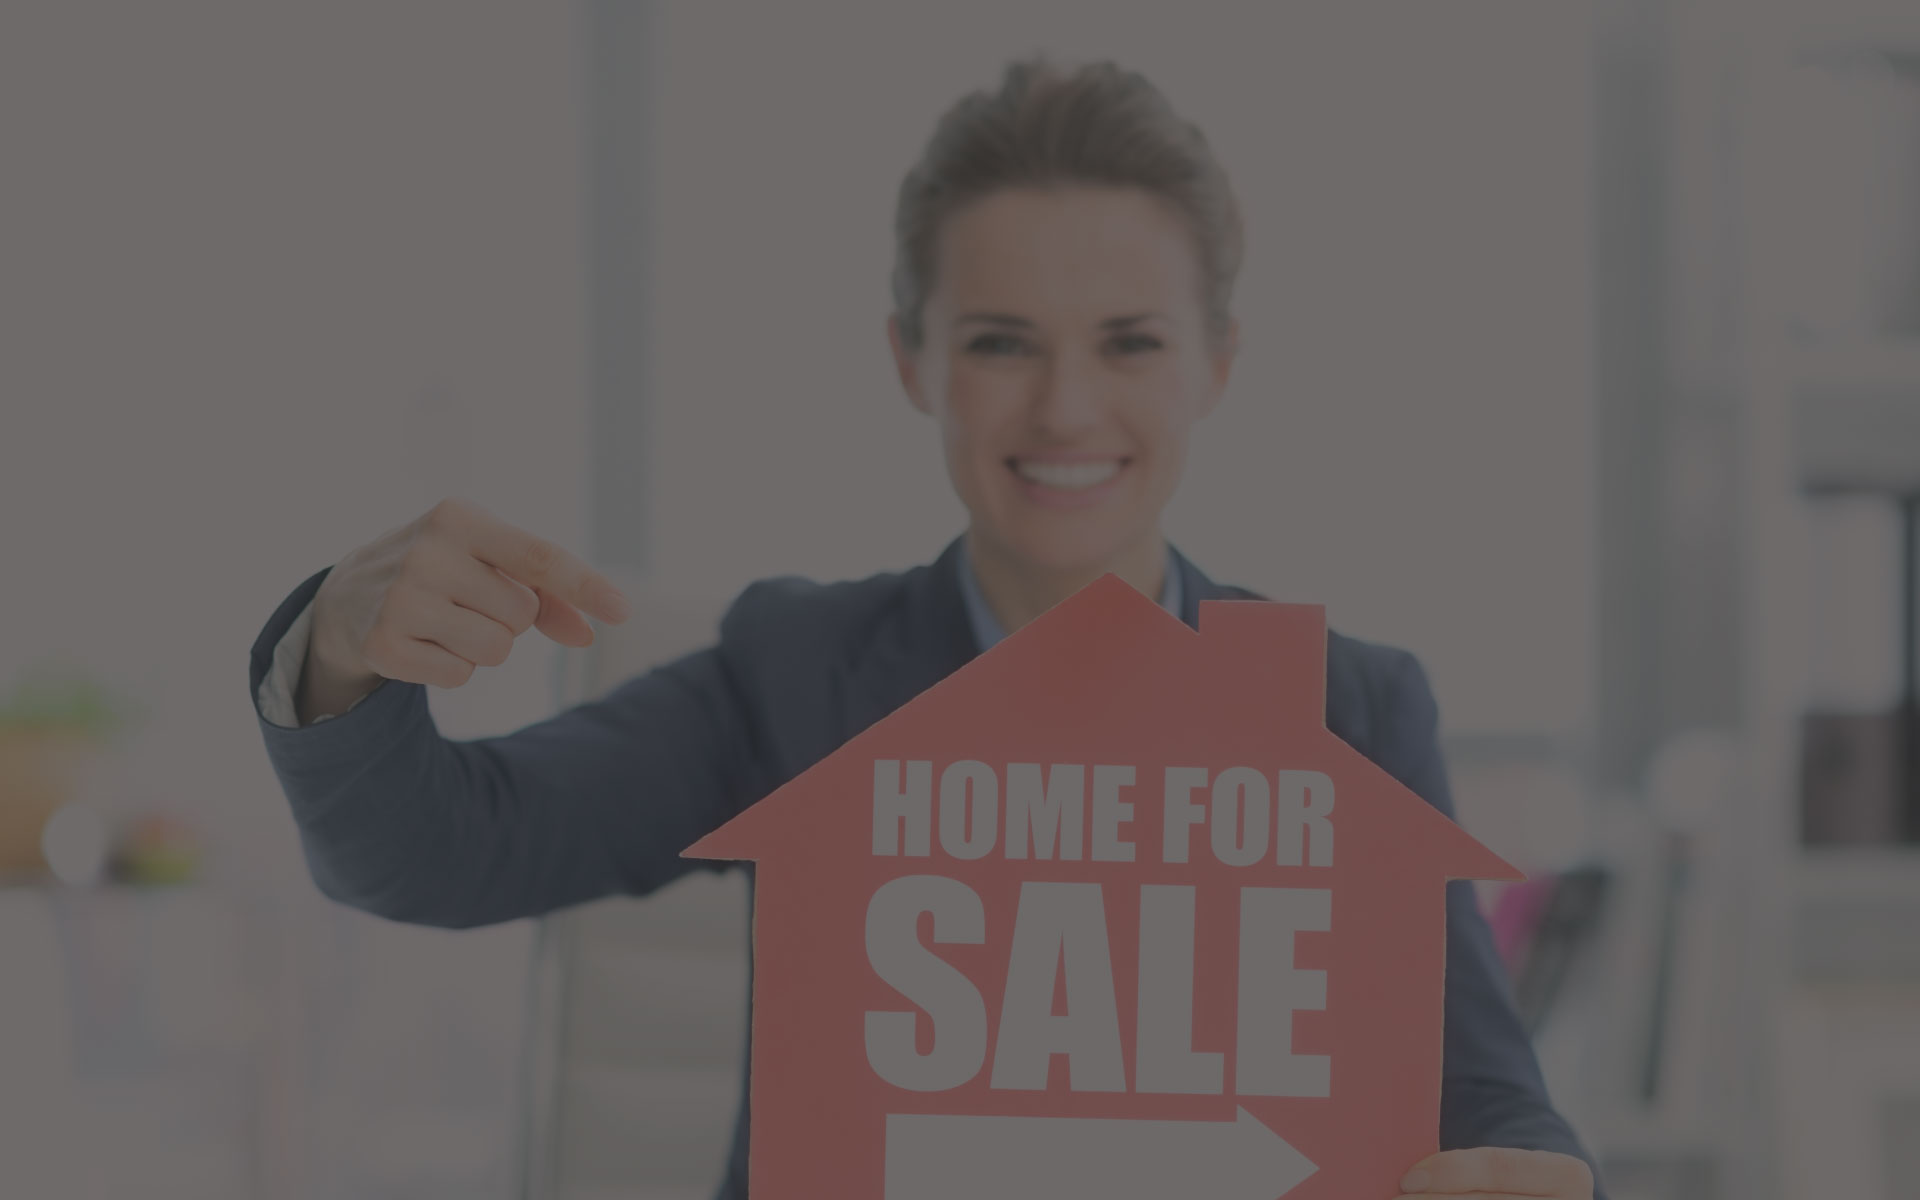 Tips For A Better Showing On Your Home For Sale